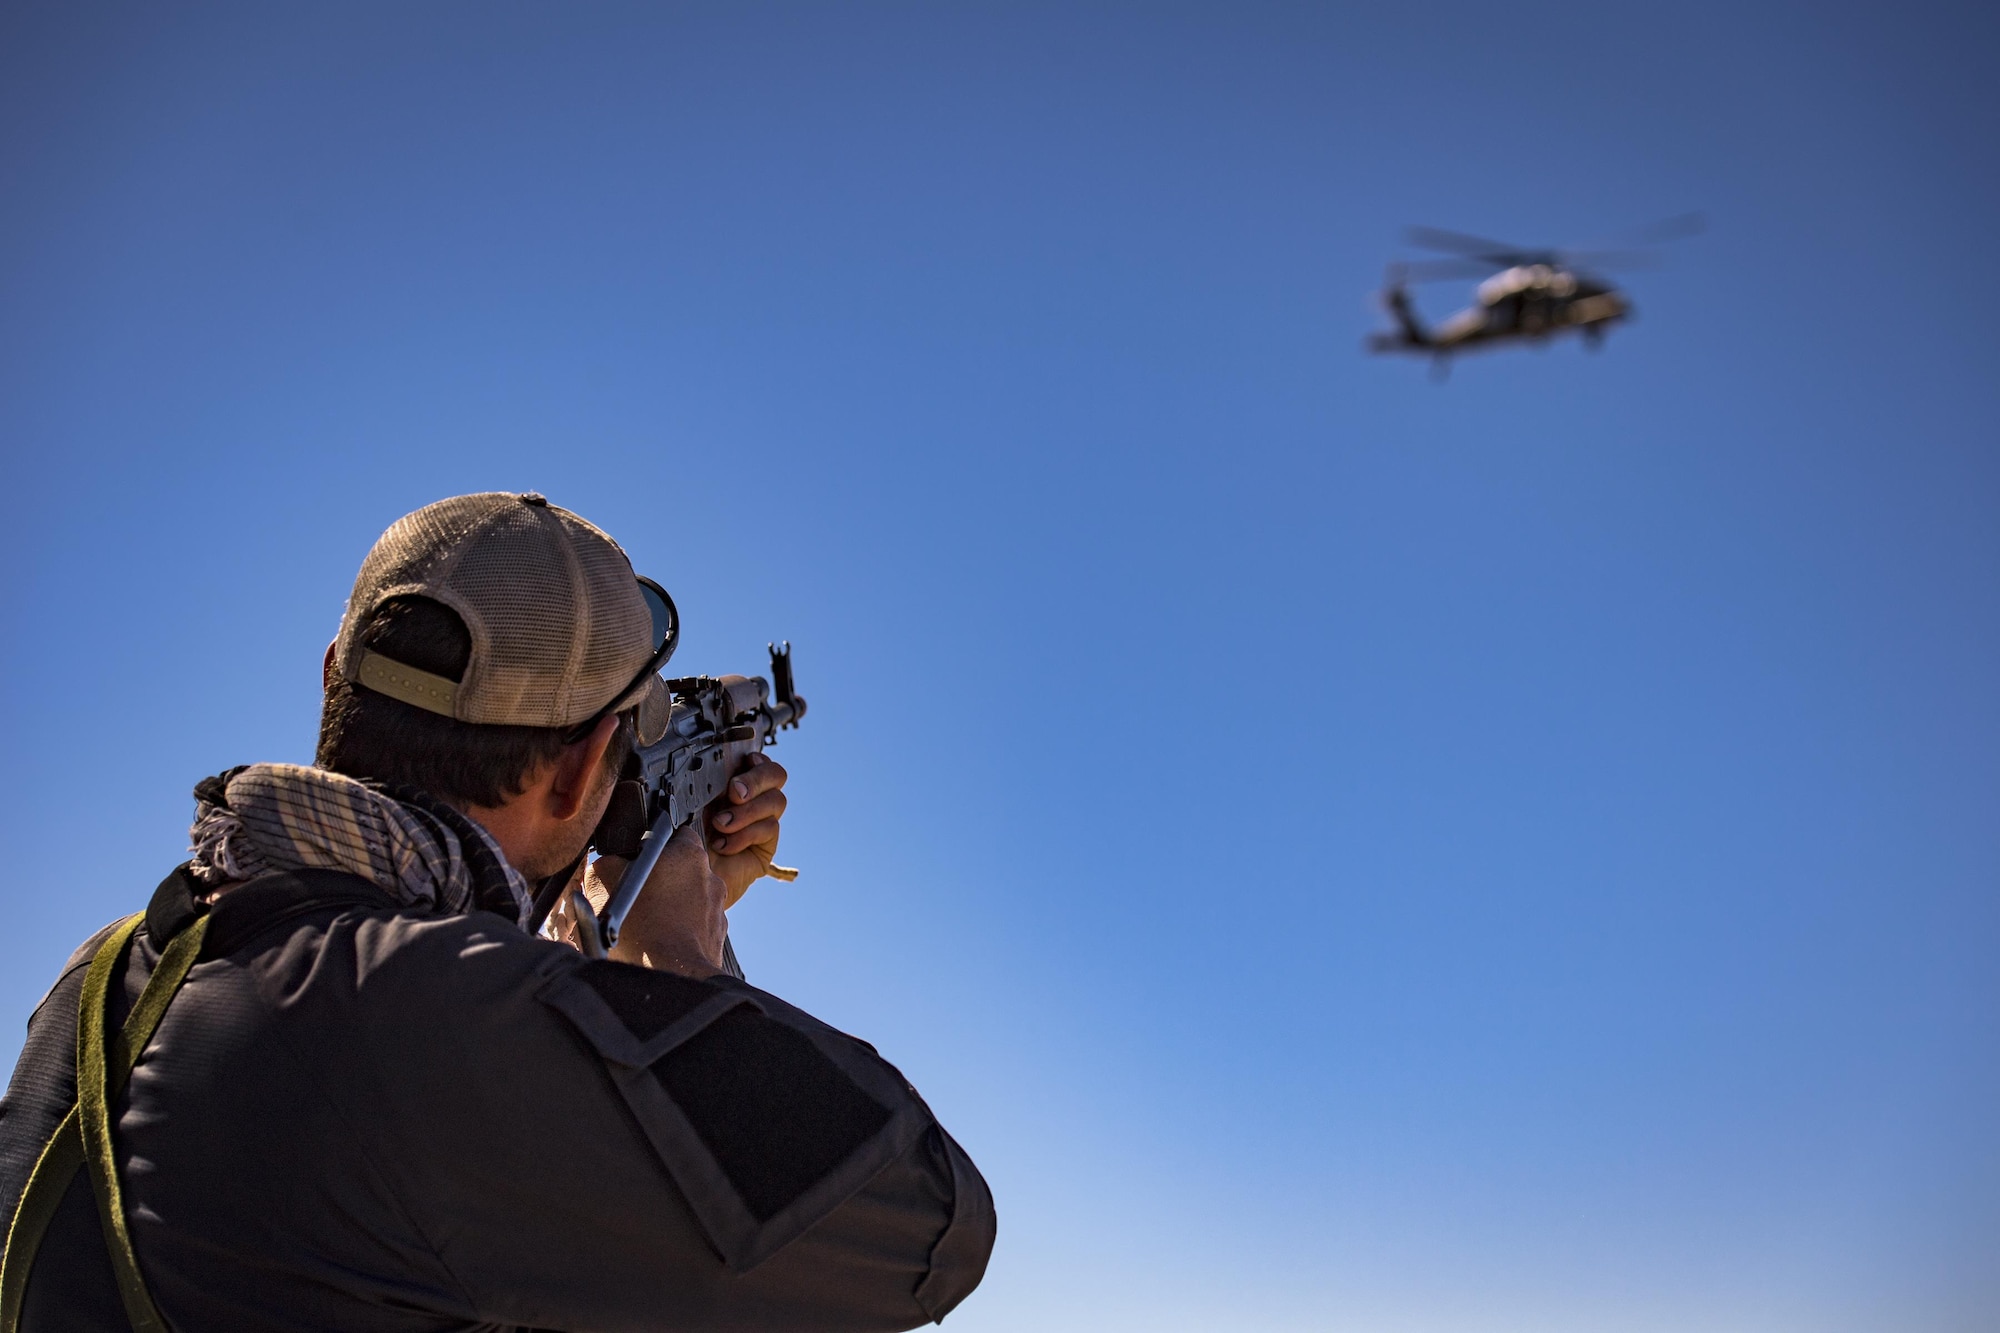 Tech. Sgt. Mykal Sequeria, 563d Operations Support Squadron rigger, targets an HH-60G pave Hawk while acting as an oppositional force member, Feb. 22, 2017, at the Playas Training and Research Center, N.M. OPFOR is a role designed to simulate downrange threats and complicate training objectives with the ultimate goal of creating a realistic training environment for units preparing to deploy. Airmen from the 563d OSS fill this role in support of numerous joint exercises each year utilizing aircraft-threat emittors, vehicle-mounted simulation weapons and waves of ground troops. (U.S. Air Force photo by Staff Sgt. Ryan Callaghan)